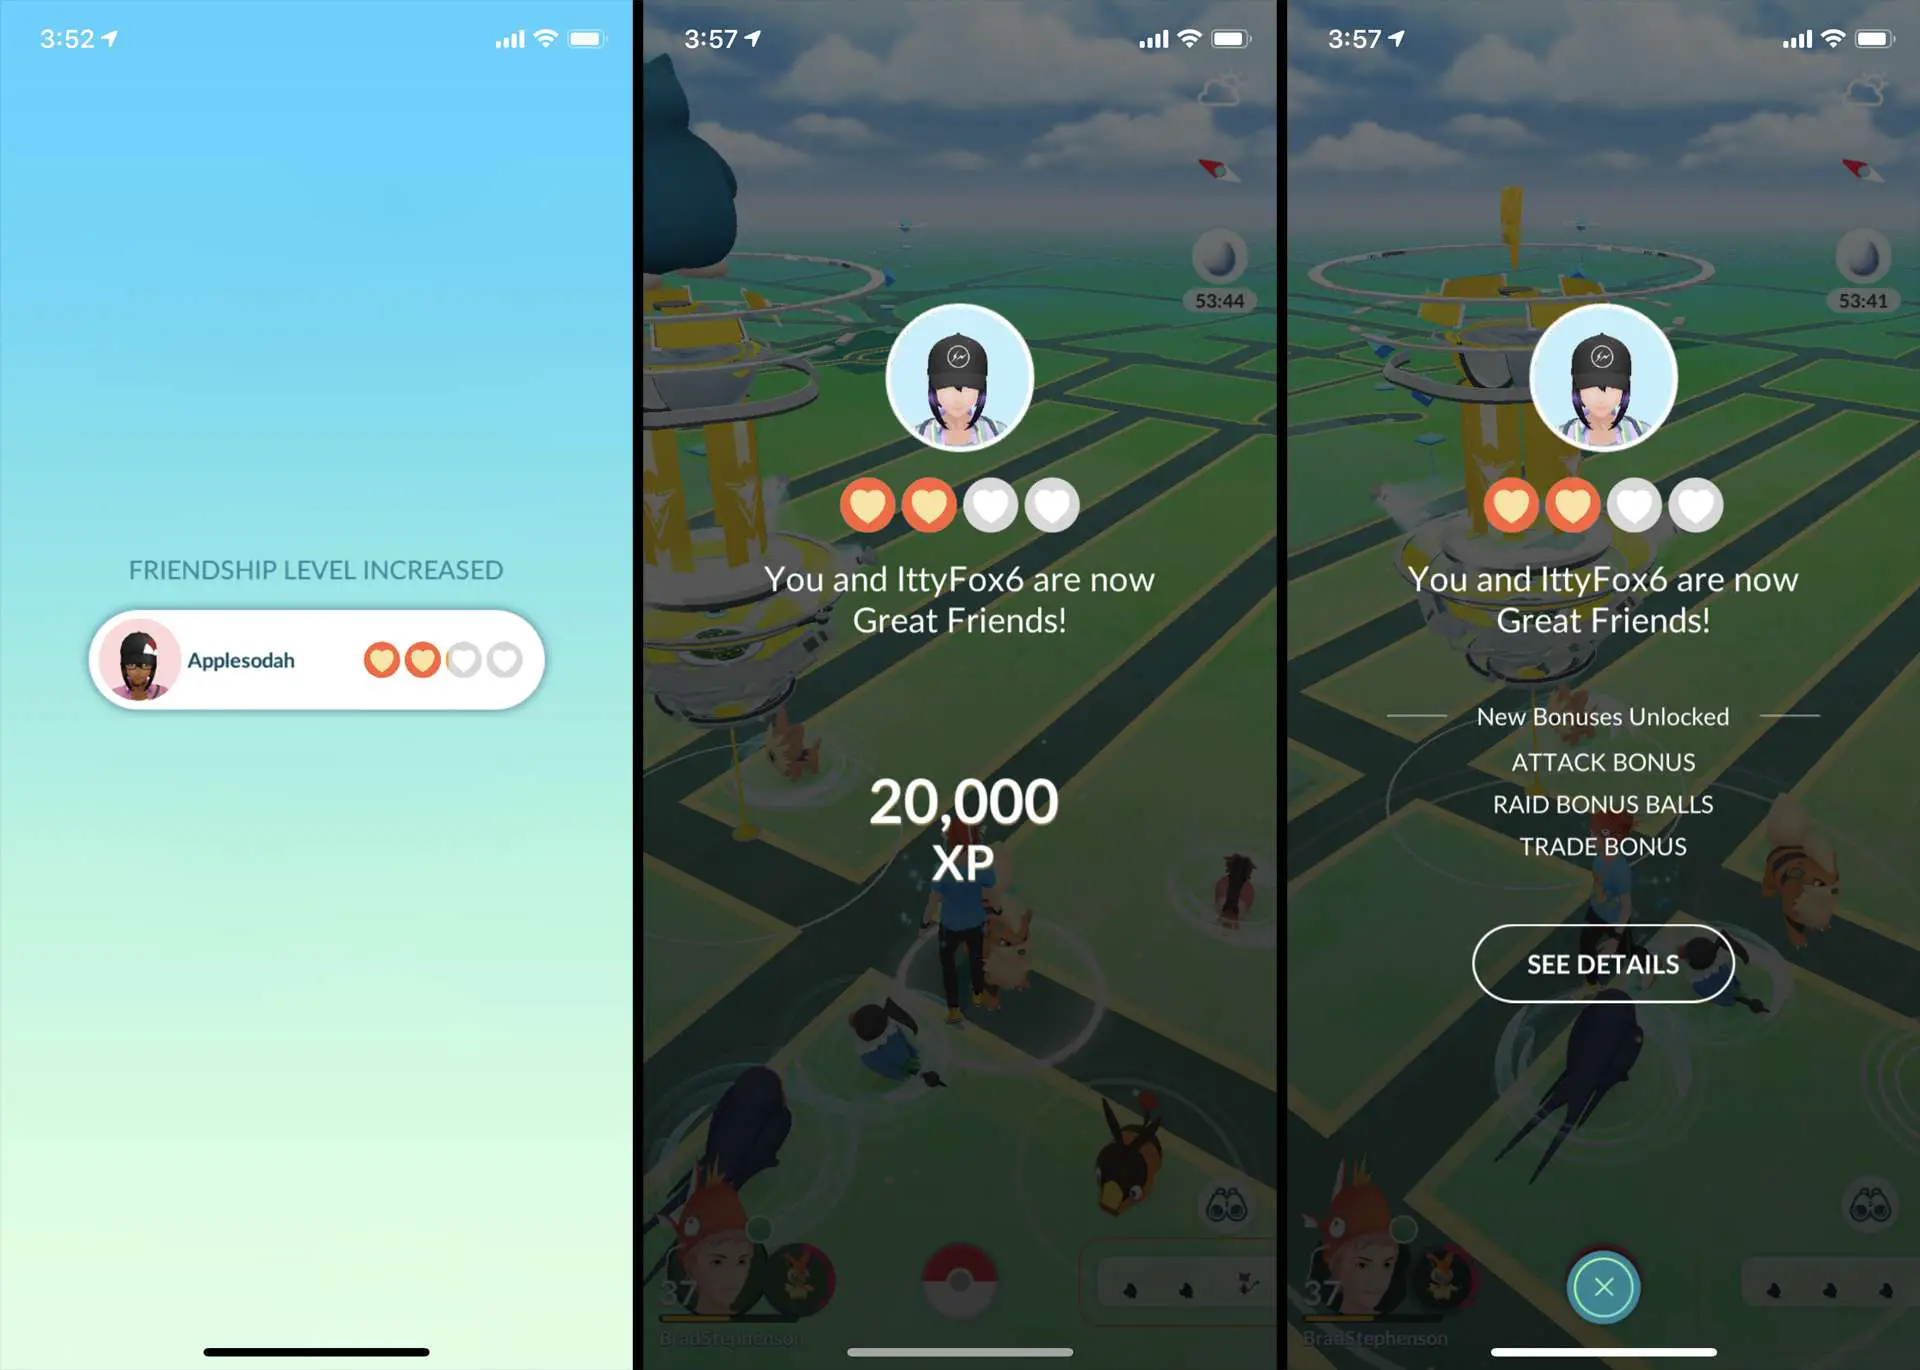 How To Get Xp In Pokemon Go 2021